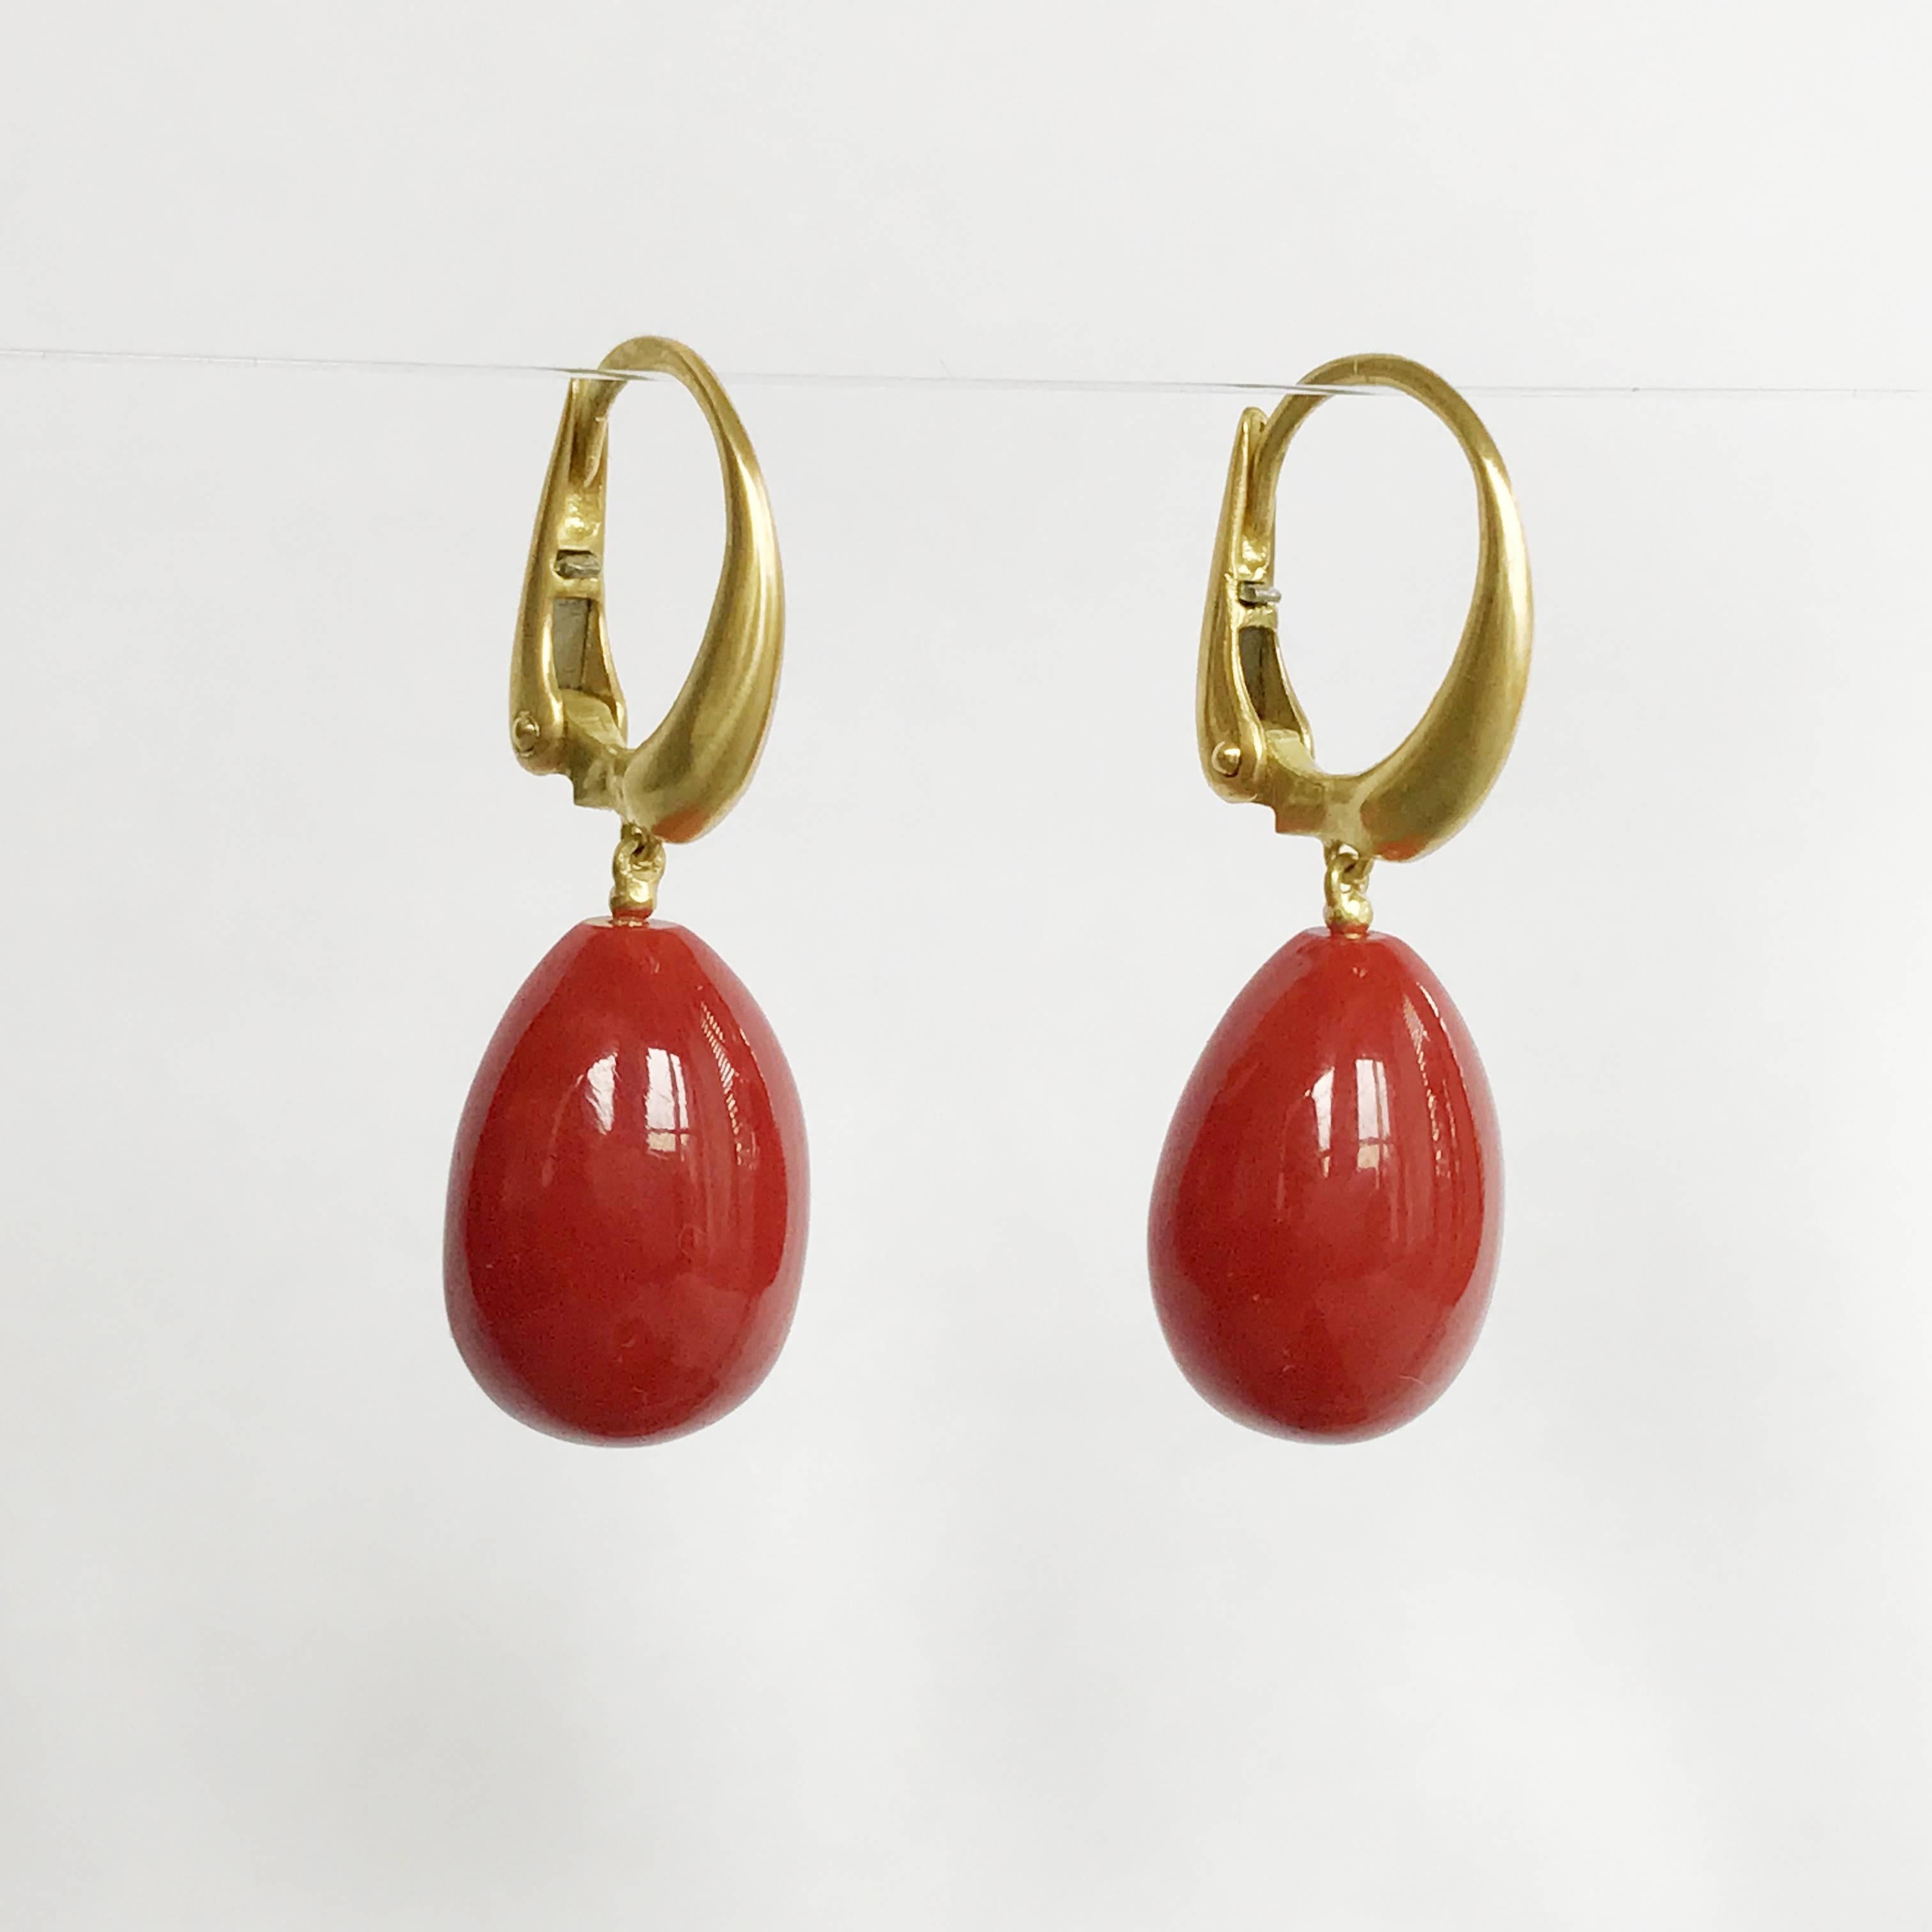 Dalben design 18 kt semi-lucid finished yellow gold earrings with two drop shape Mediterranean Red Coral 11,8 x 15 mm  weight 24,3 carat . 
Earring dimension :  
width 11,8 mm 
height with leverback 31,8 mm  
The earrings has been designed and